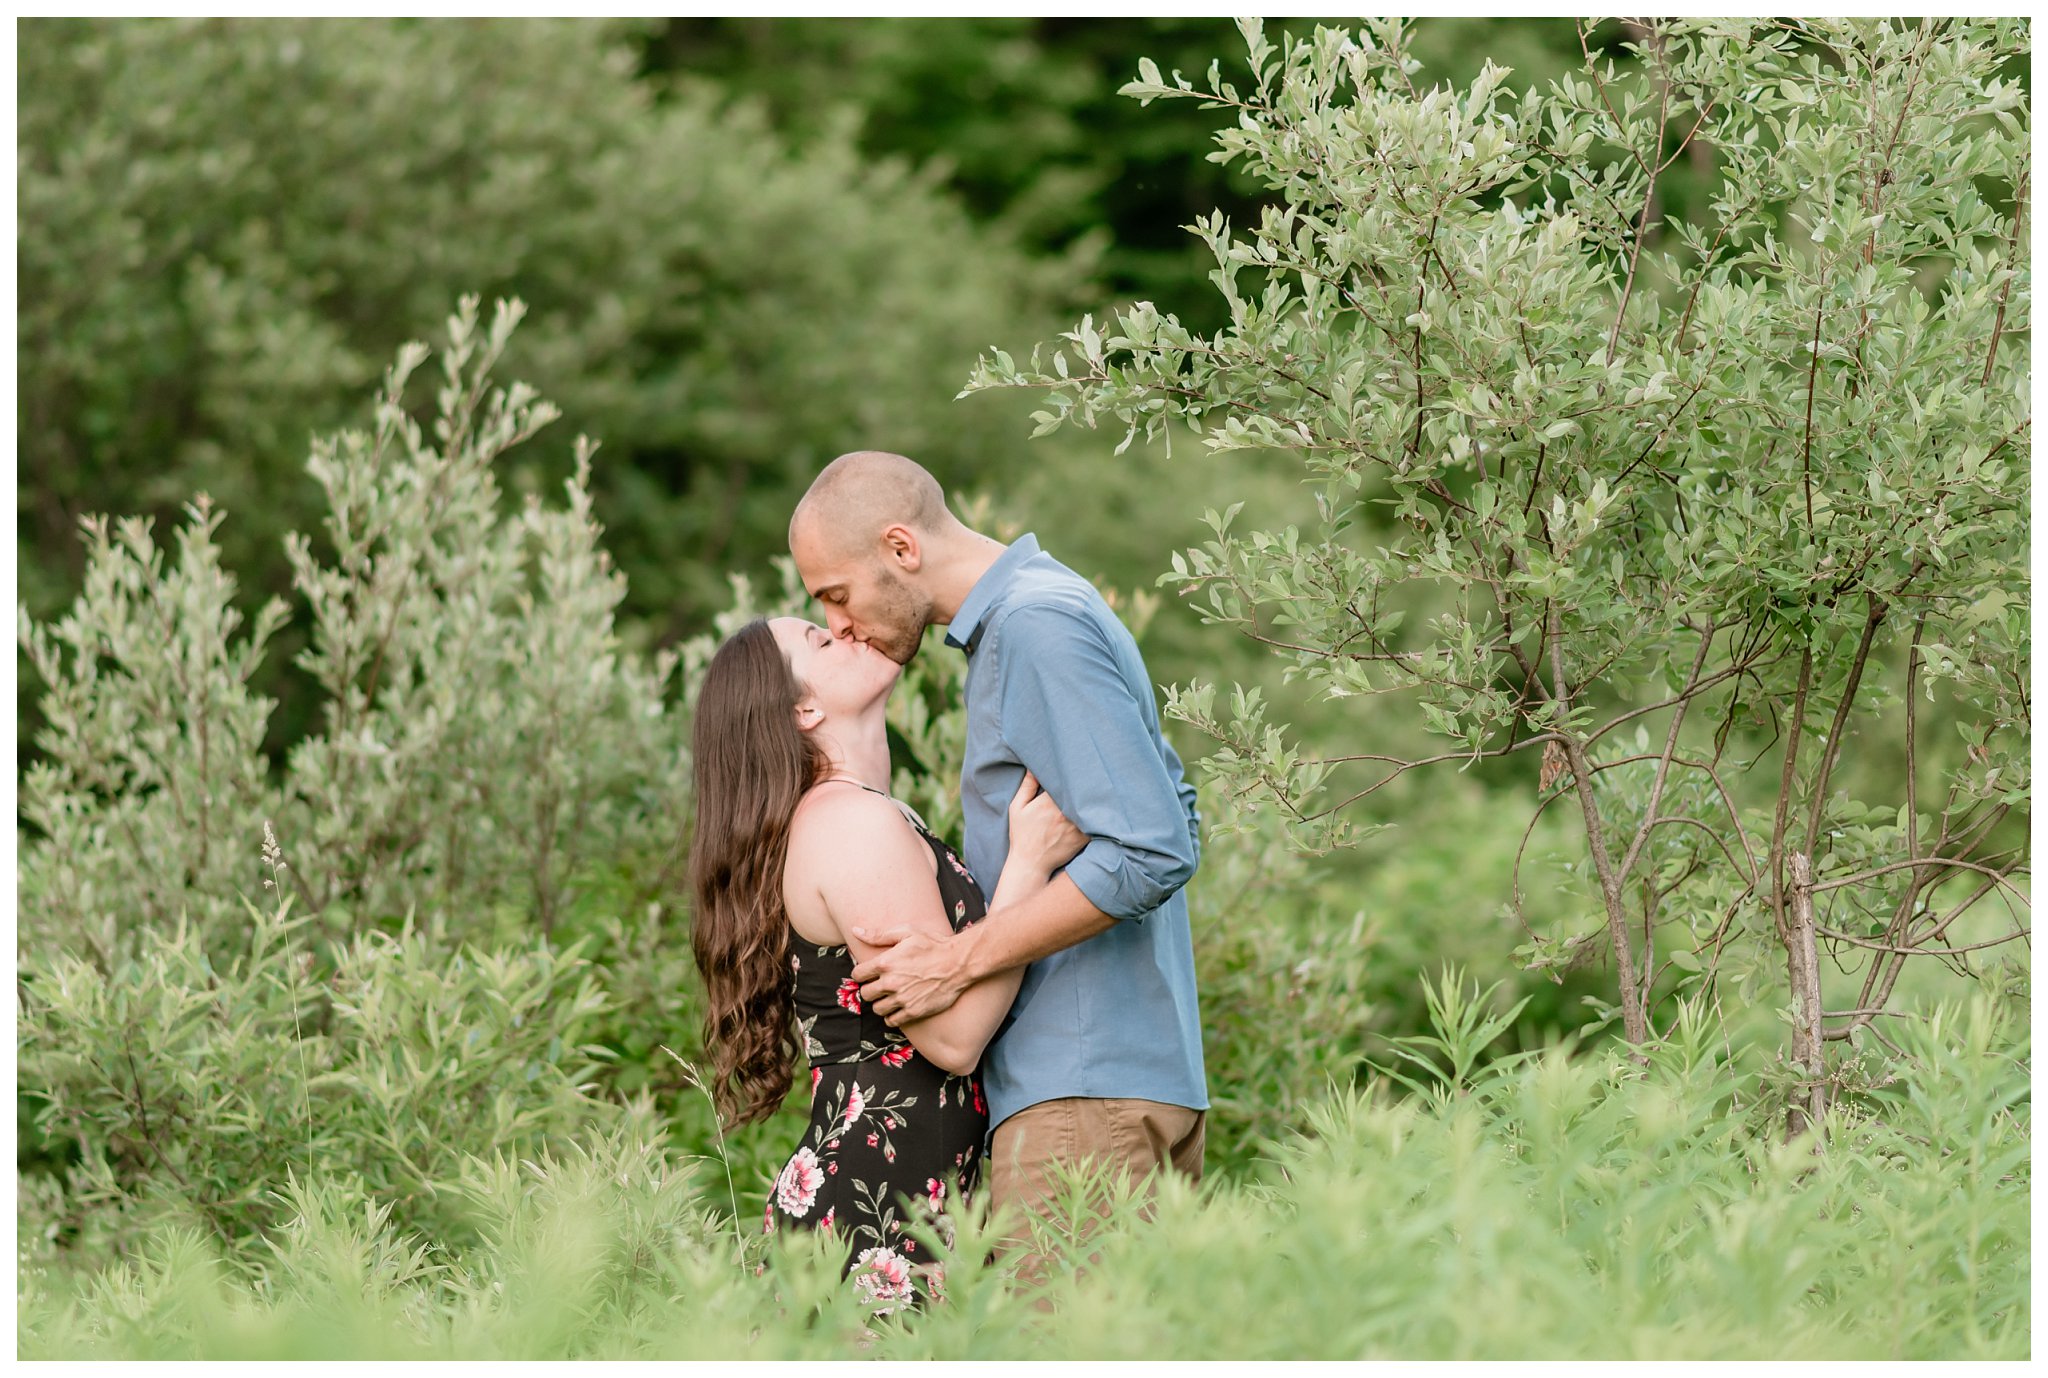 Salmon River Falls Engagement Session Joanna Young Photography_0020.jpg